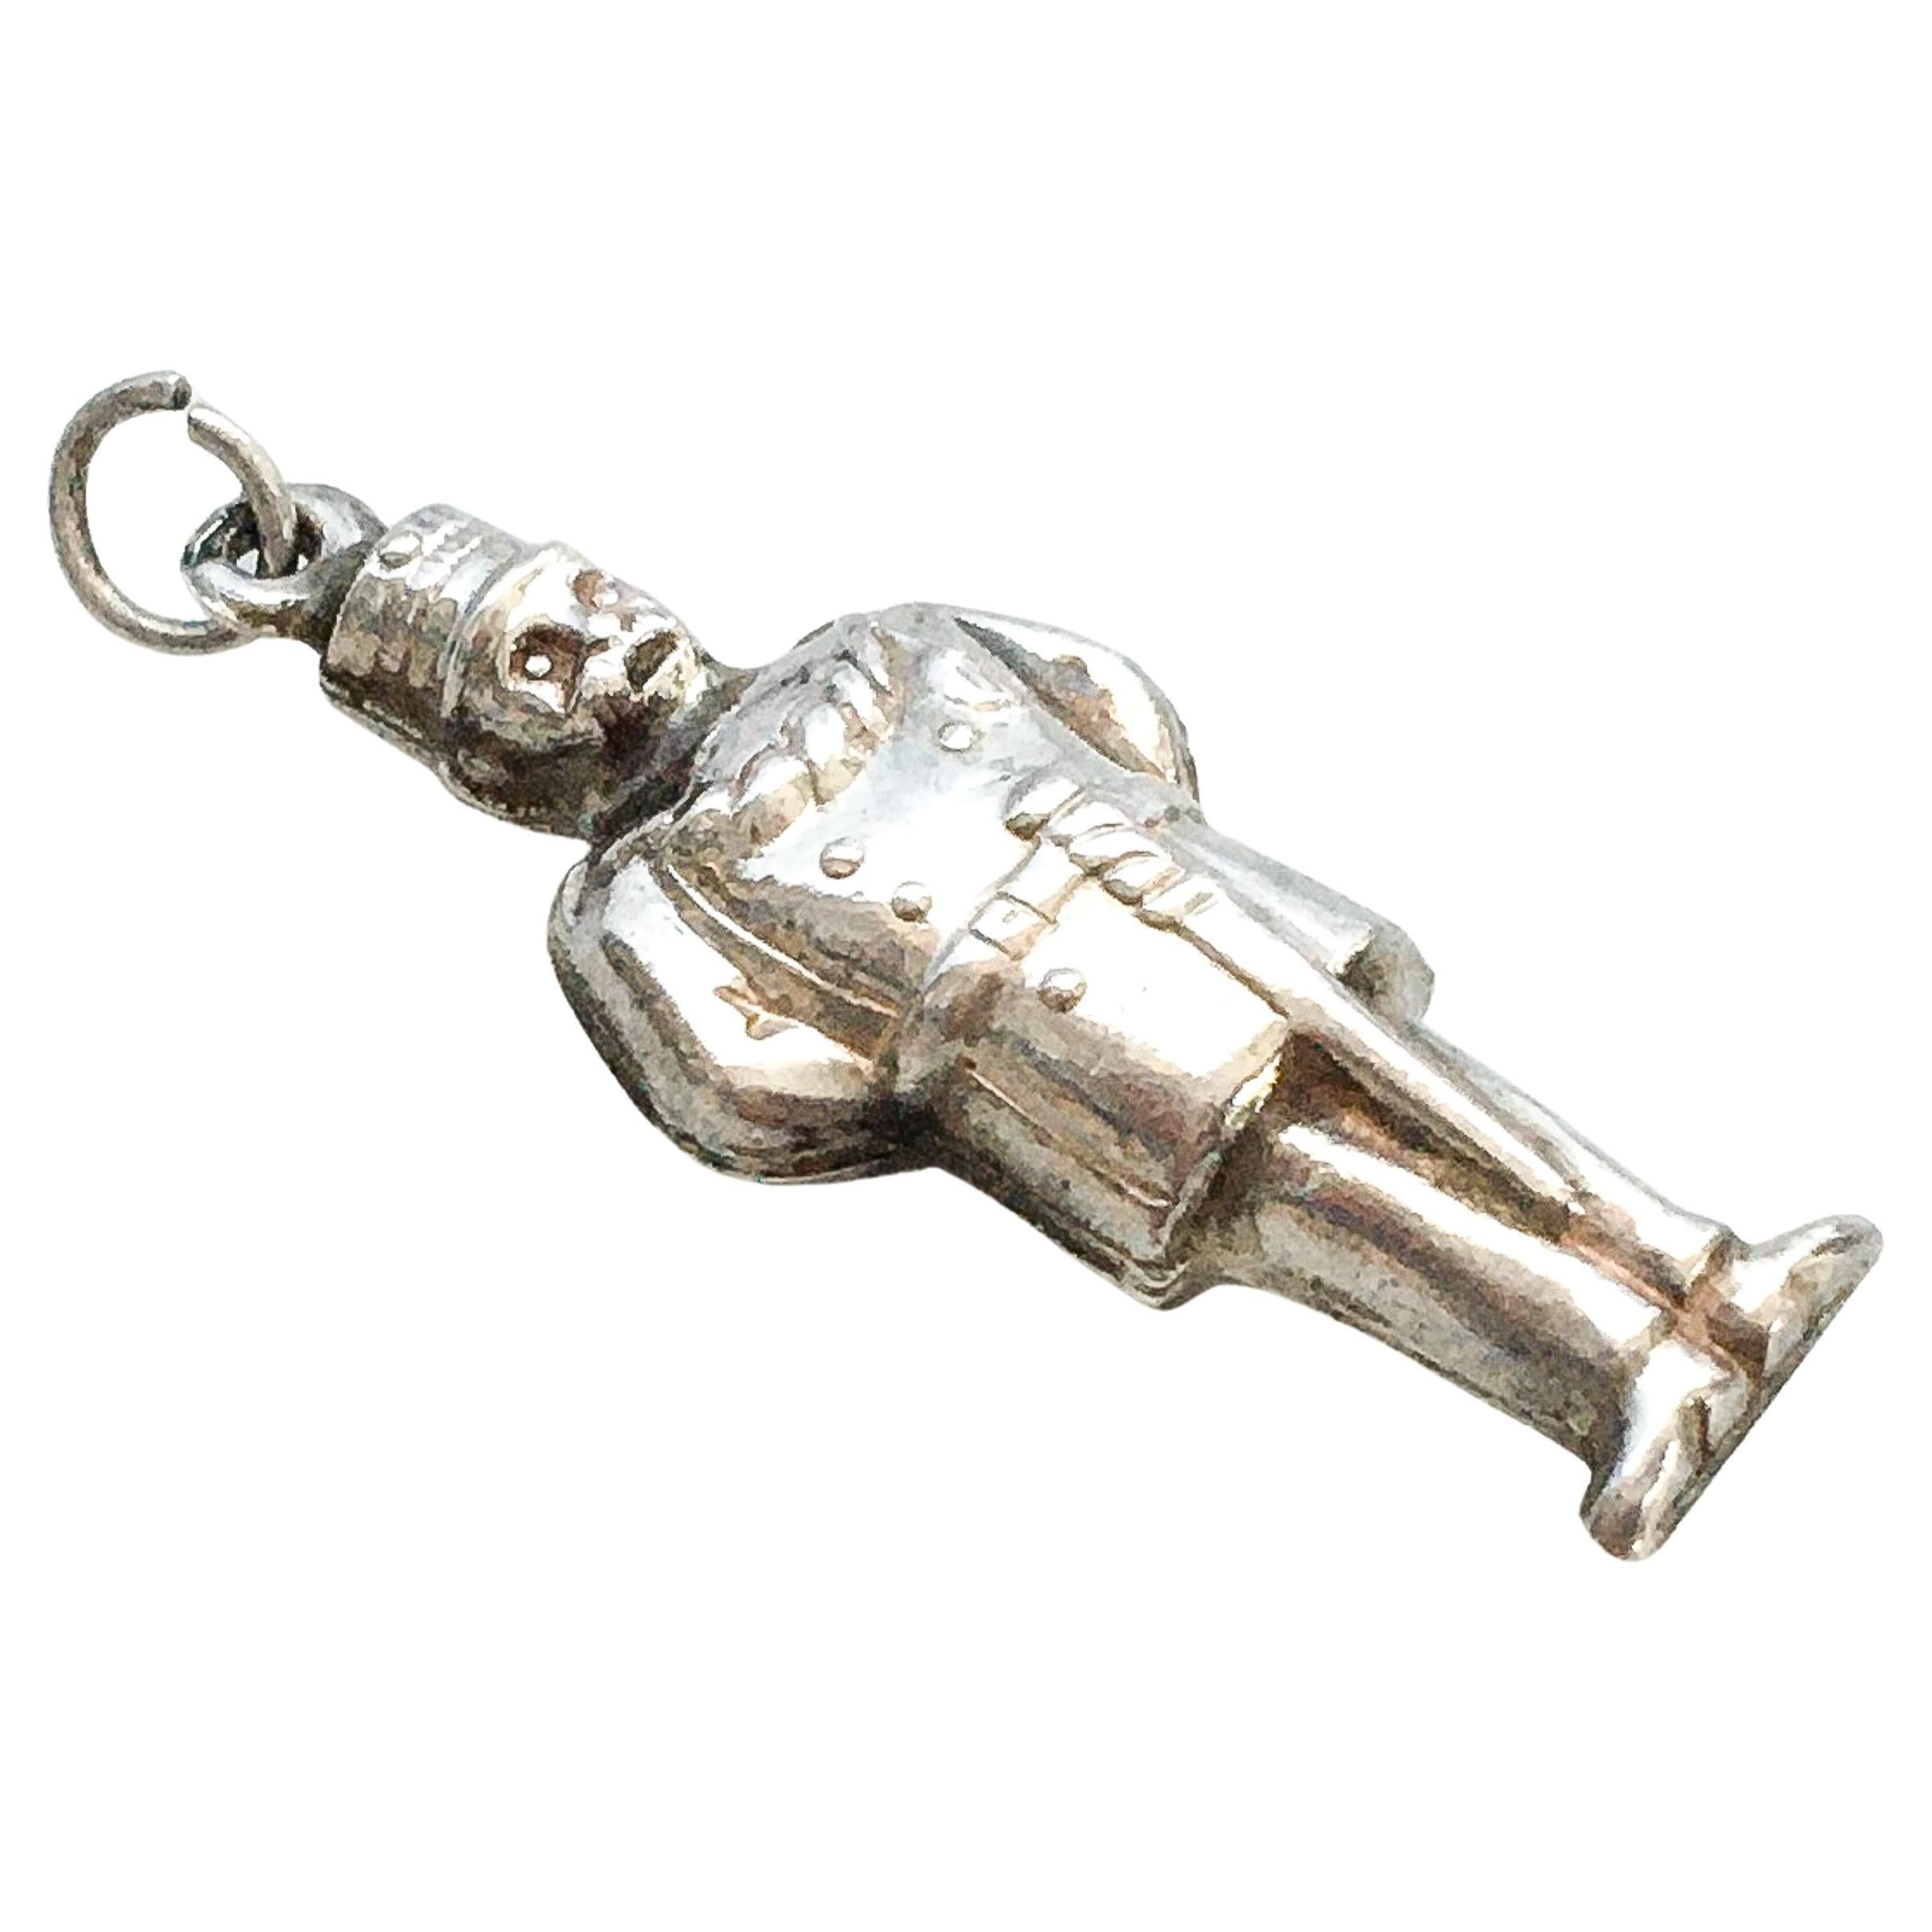 A three-dimensional vintage Dutch rural policeman charm pendant crafted in 835 silver. This officer is nicely detailed with his uniform, headgear and baton. The charm can be worn as an addition to your charms bracelet or alone as a pendant on a